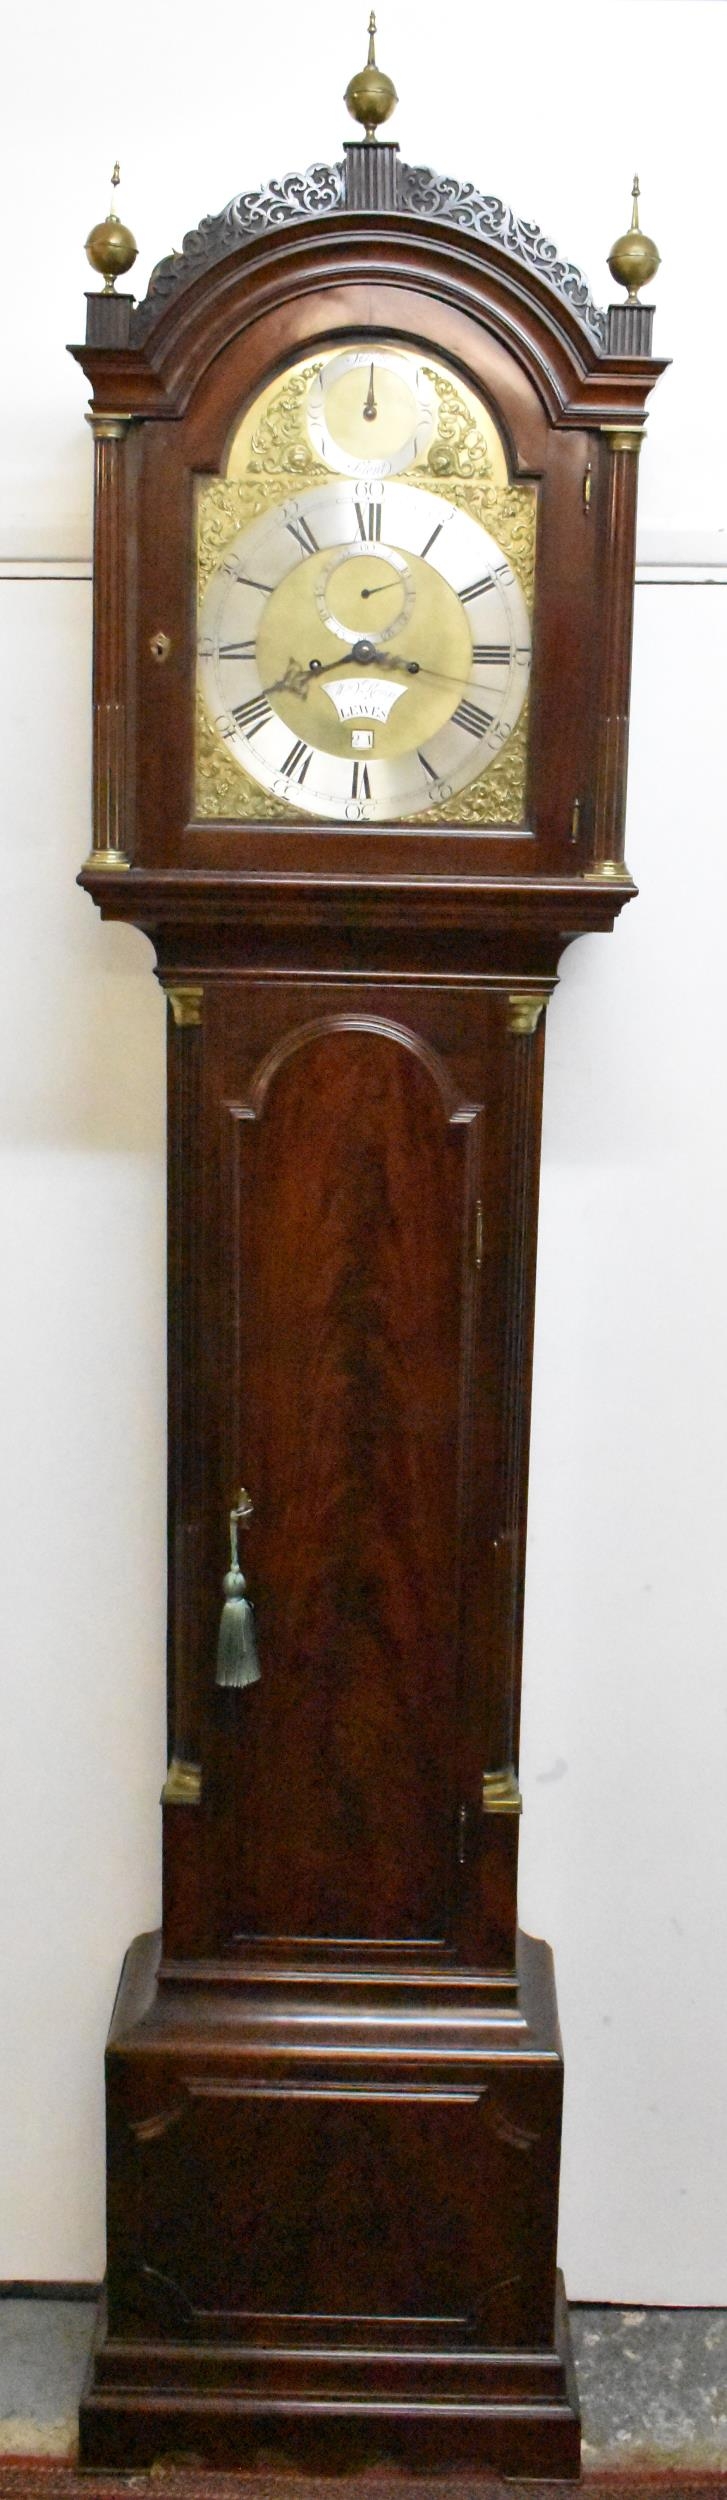 A George III mahogany longcase clock, the case having an arched top with three ball and spike